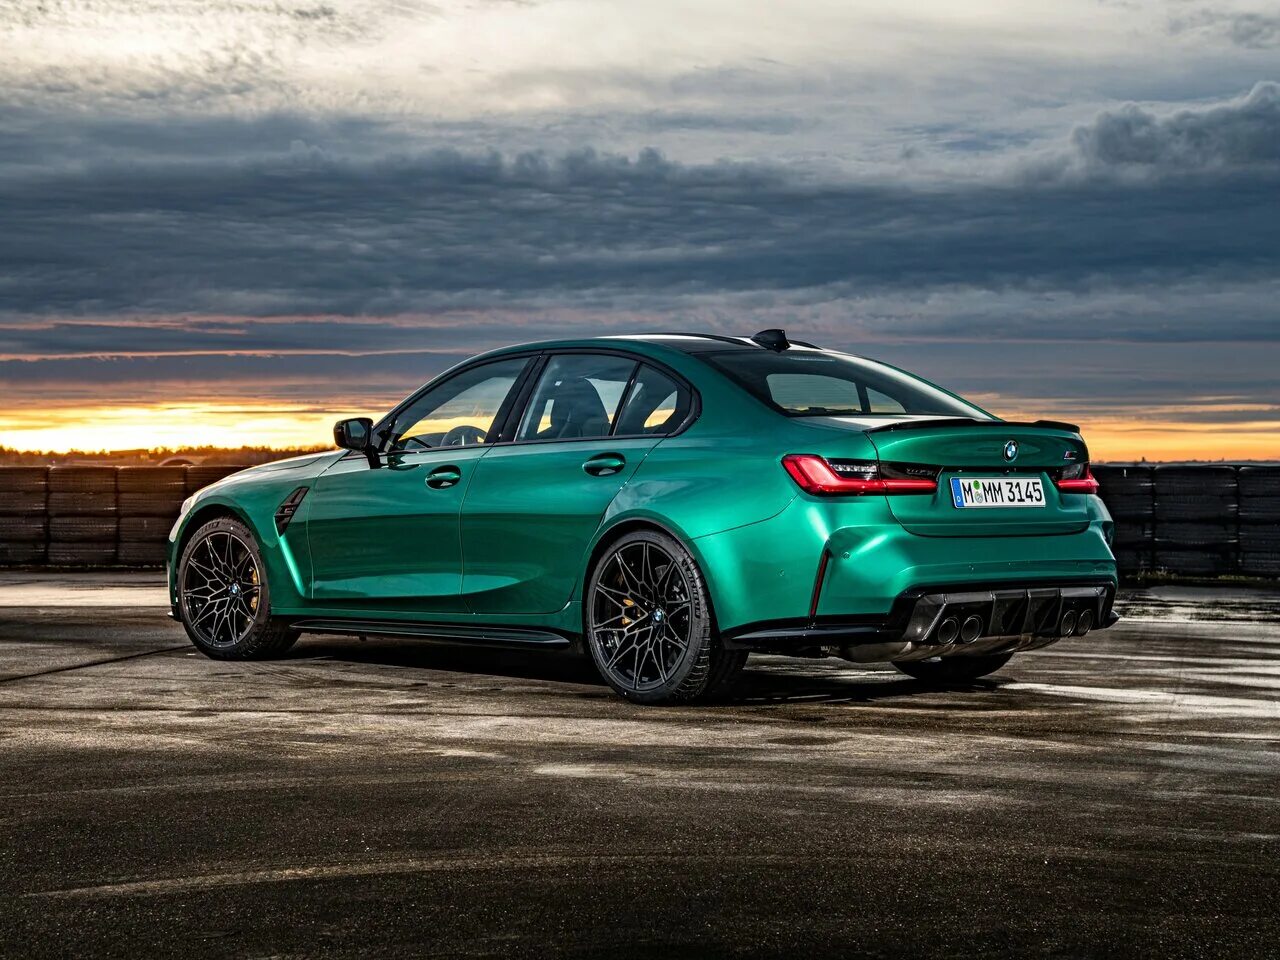 Bmw g80 цена. BMW m3 g80. BMW m3 g80 2020. BMW m3 Competition 2021. BMW m3 g80 Competition.